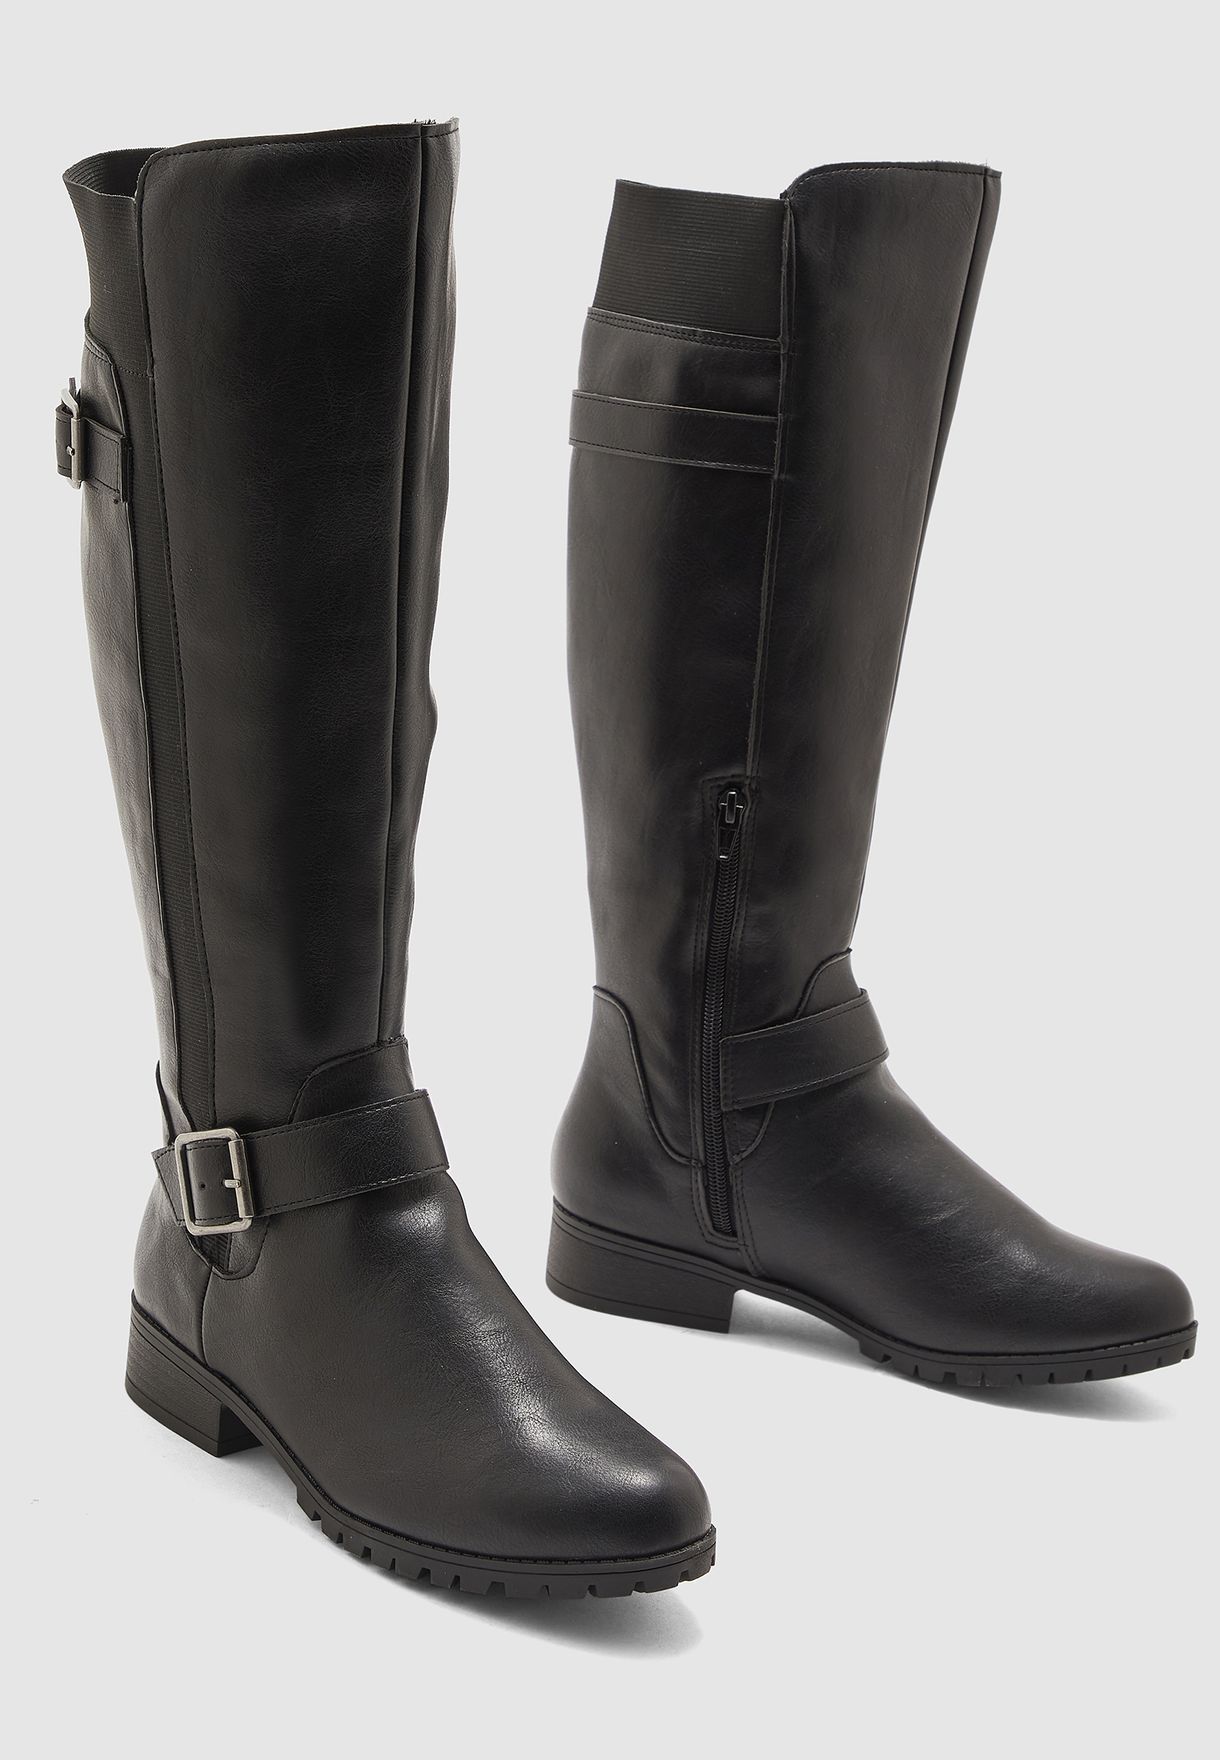 steve madden boots with buckles